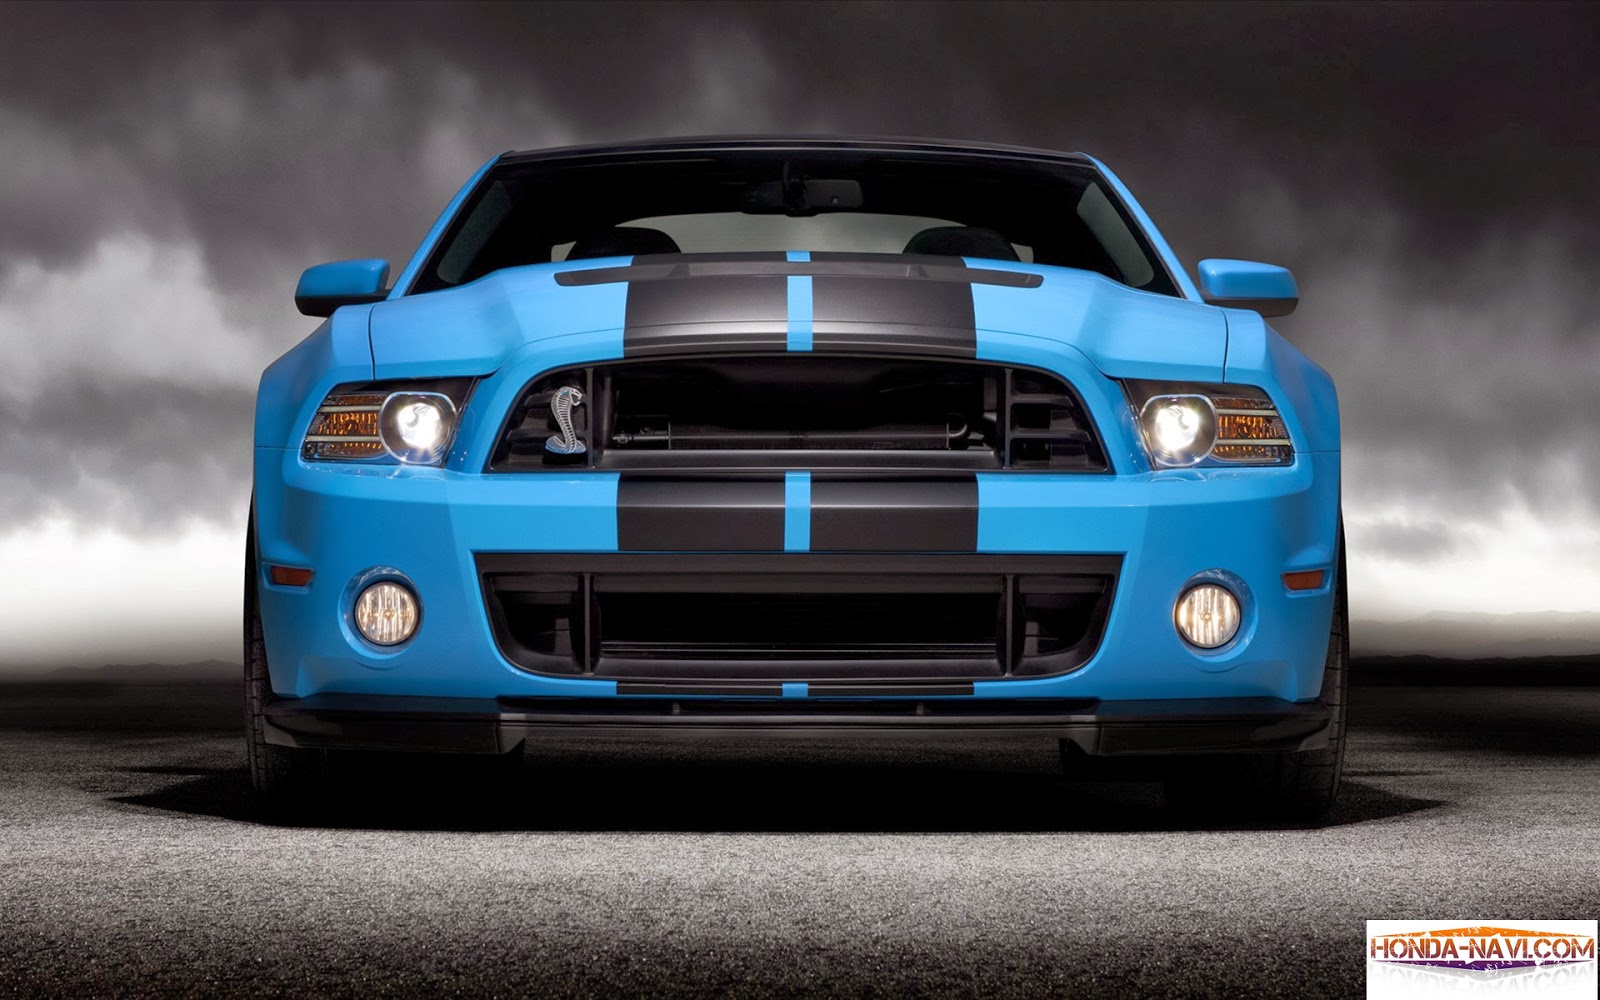 Widescreen Ford wallpapers | Nice Pics Gallery